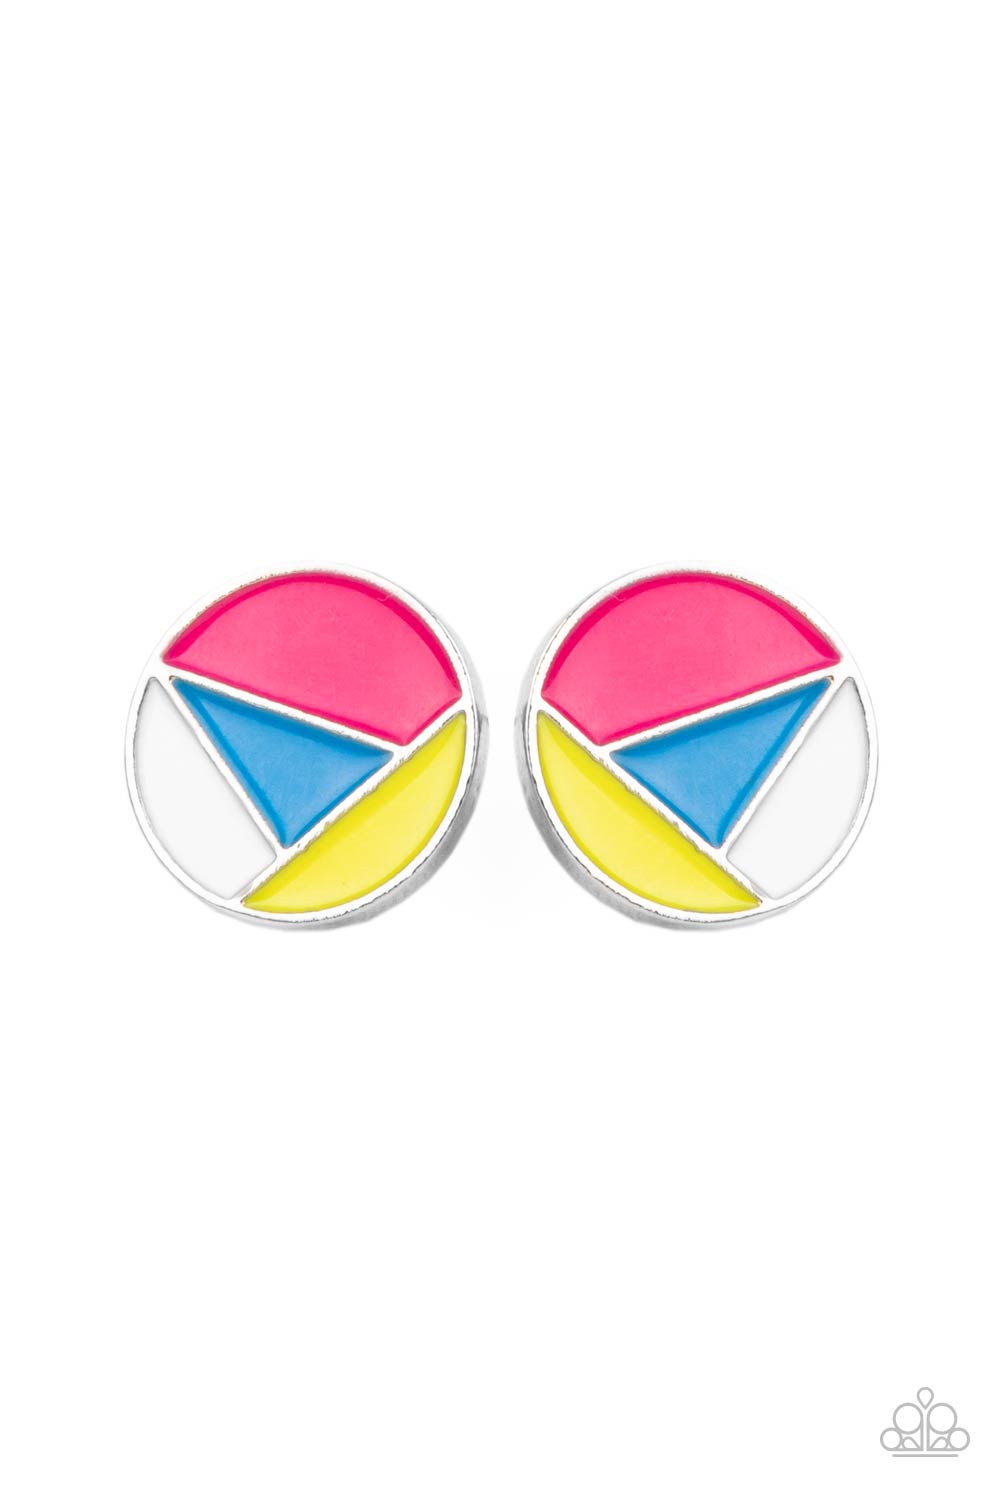 Artistic Expression - Multi-color post earrings